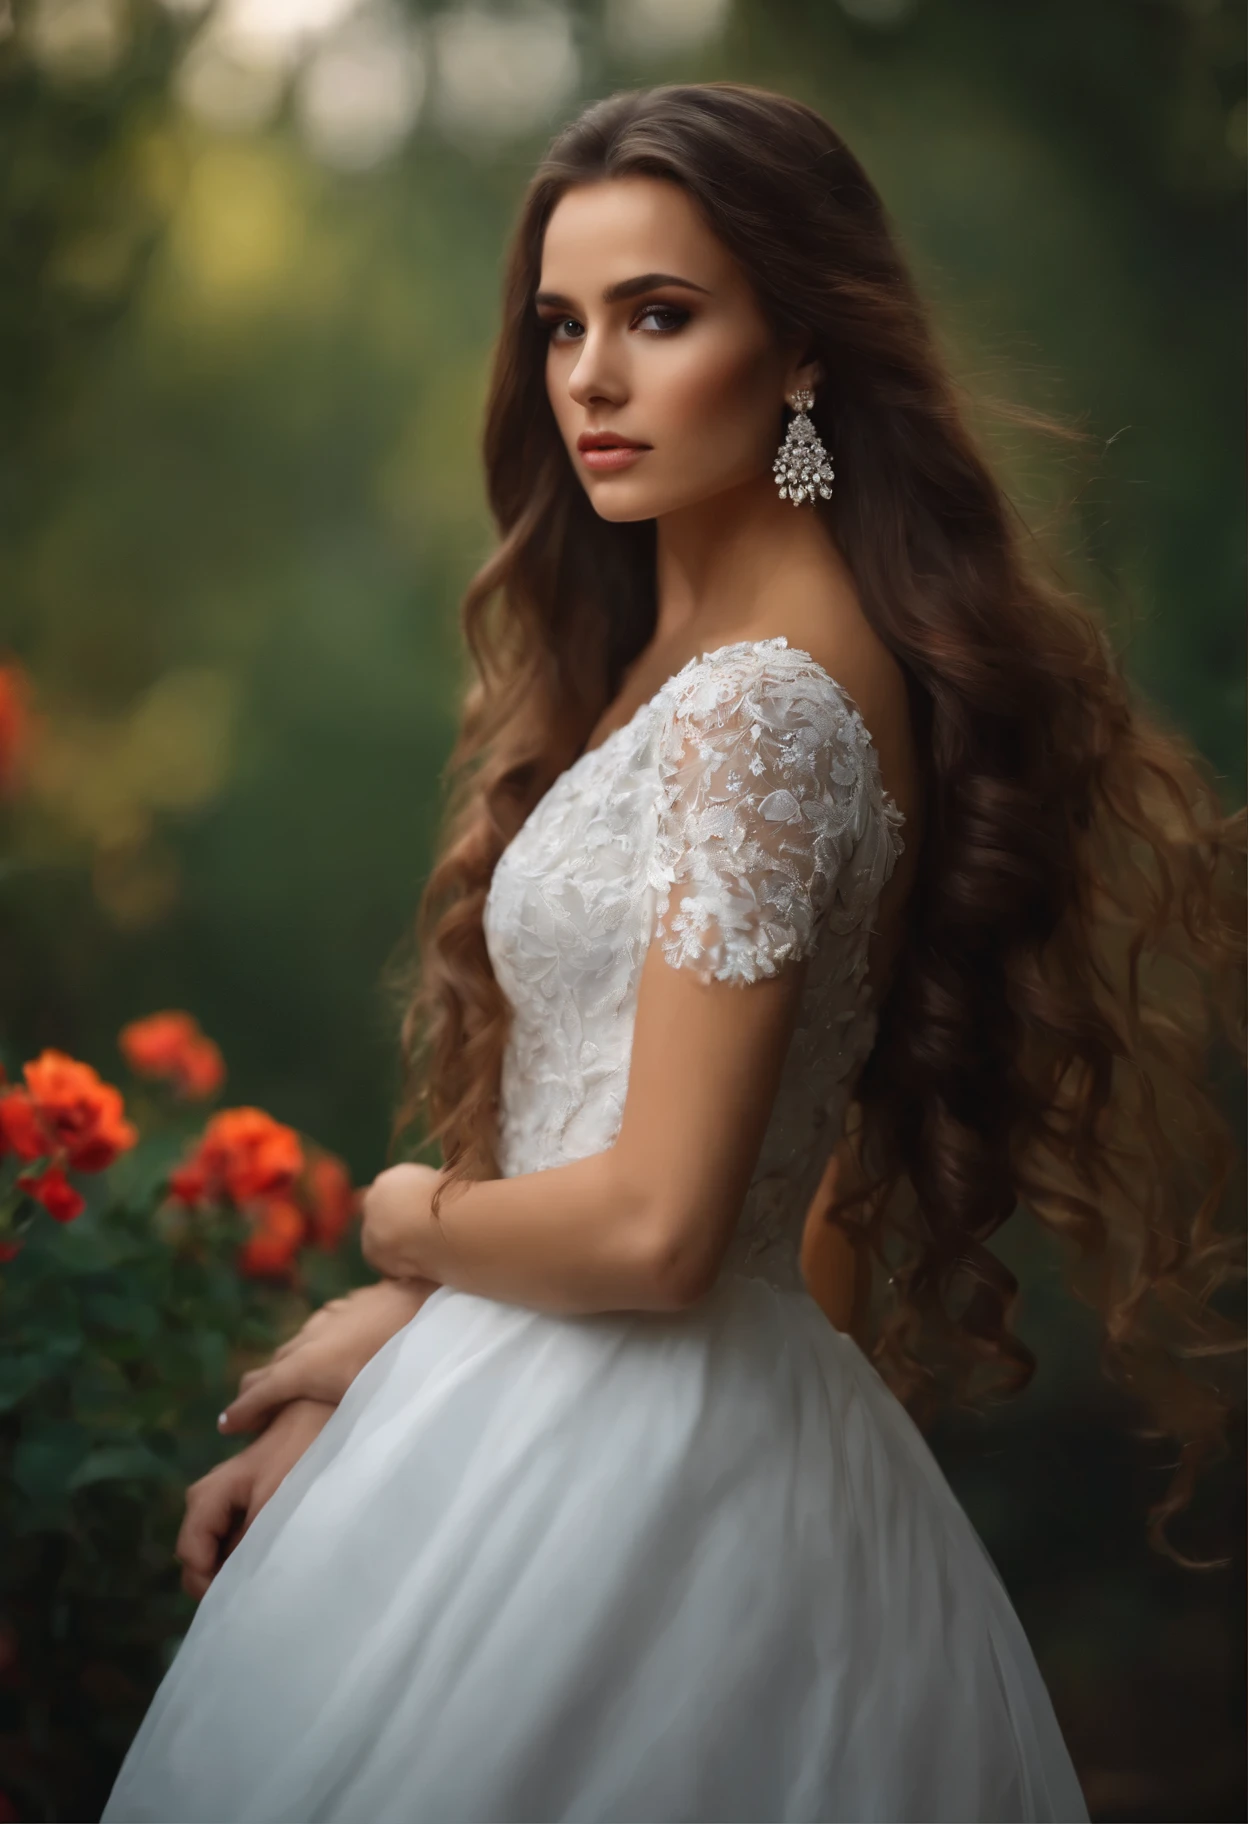 Beautiful Woman in White Off Shoulder Gown · Free Stock Photo